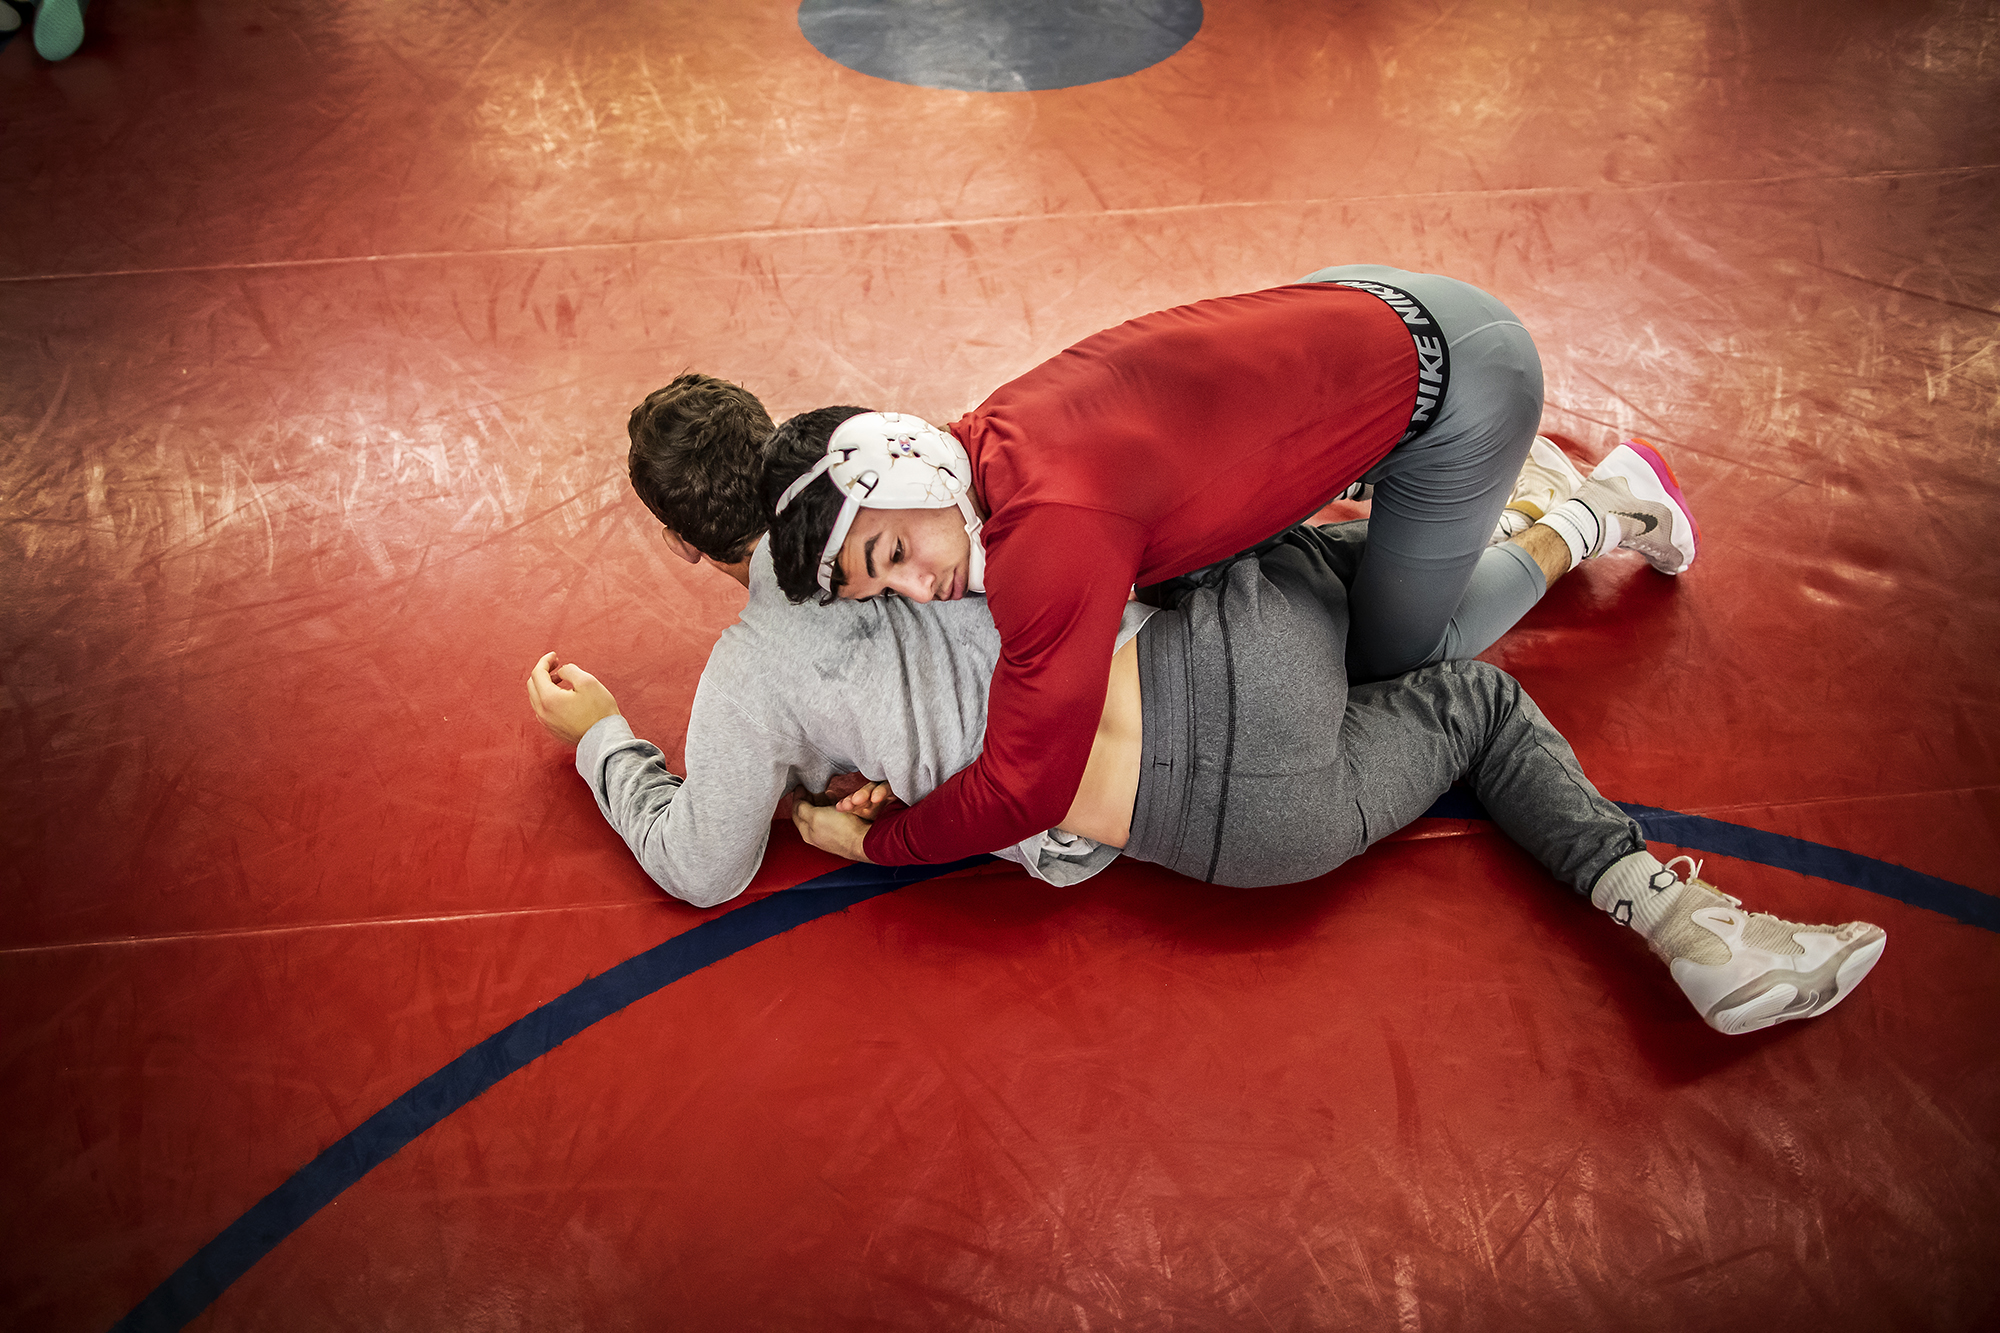 student wrestlers practice at the training center